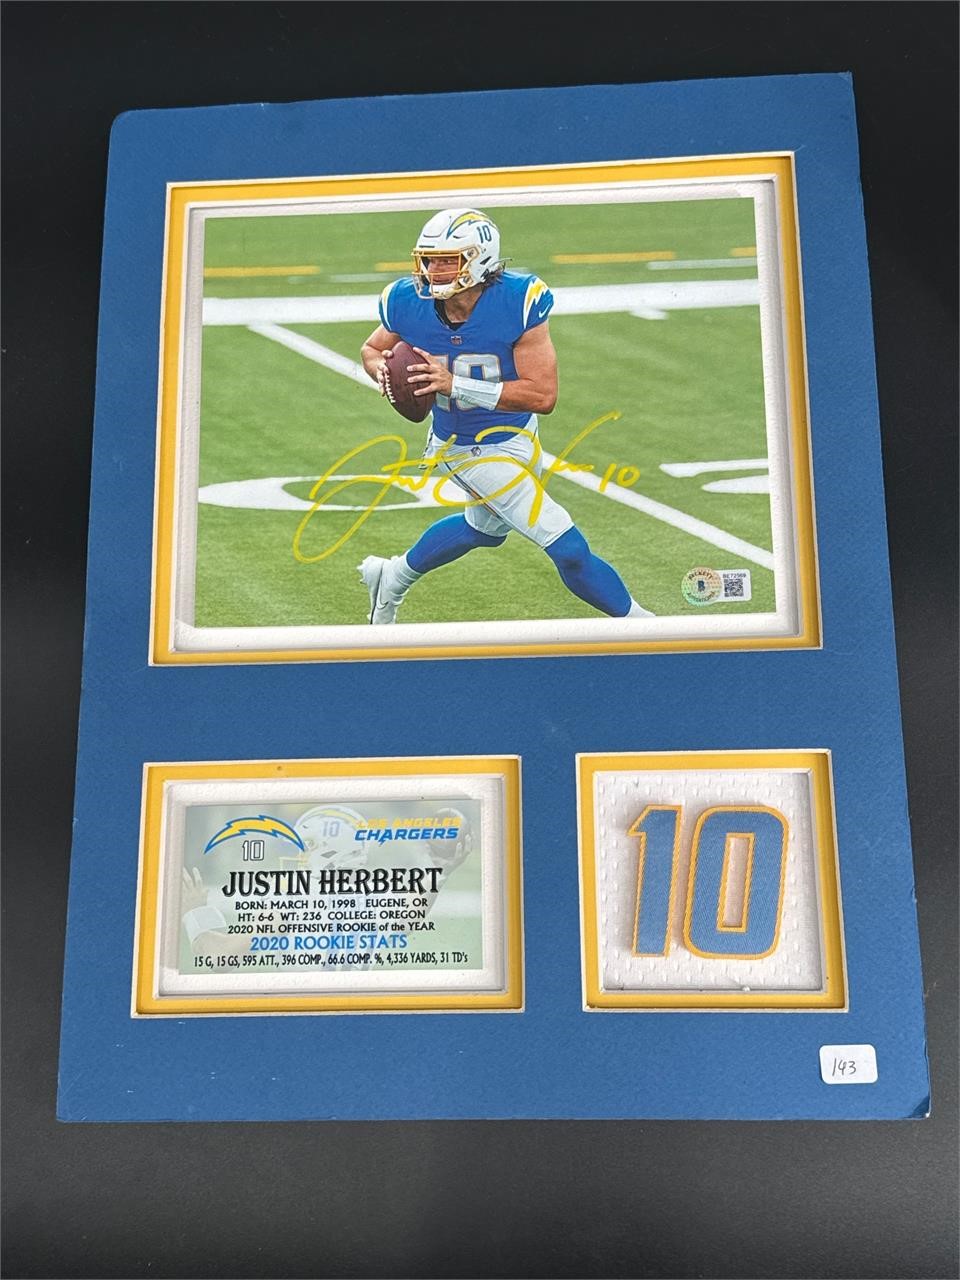 SPORTS COLLECTIBLE AUCTION CARDS HELMETS JERSEYS +MORE